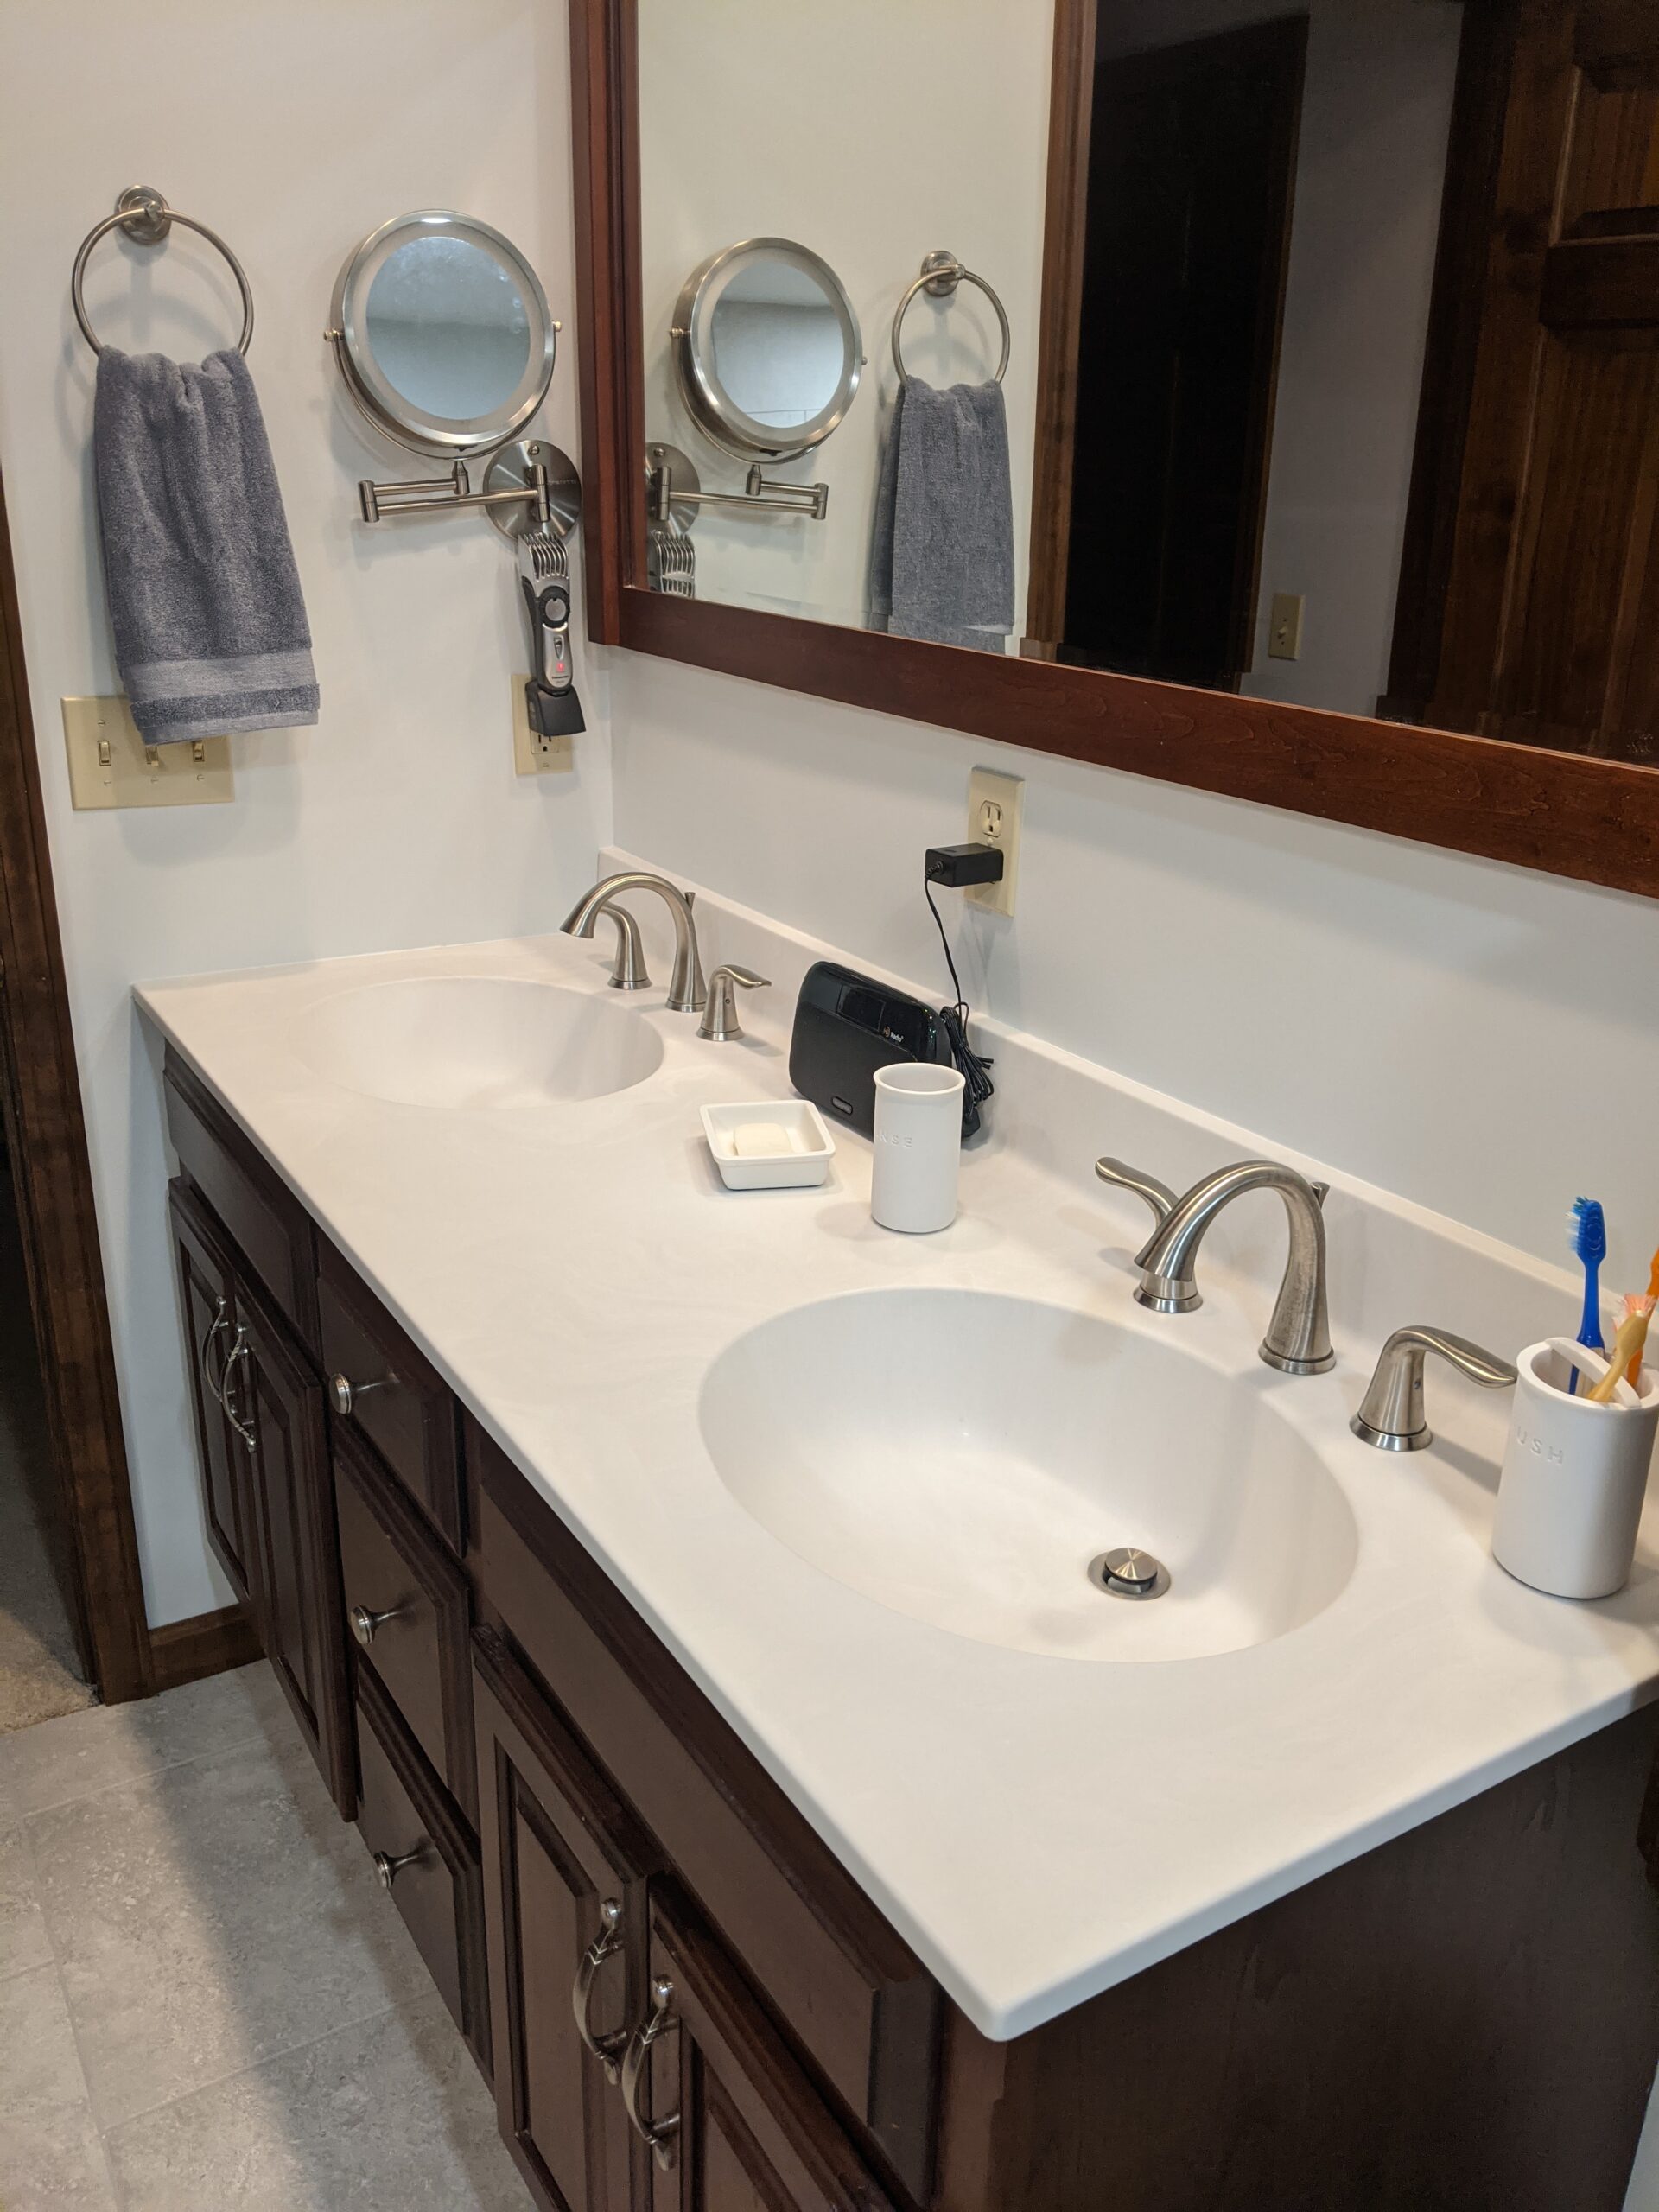 New updated cultured marble double bowl vanity top with 8" widespread faucets in stainless steel